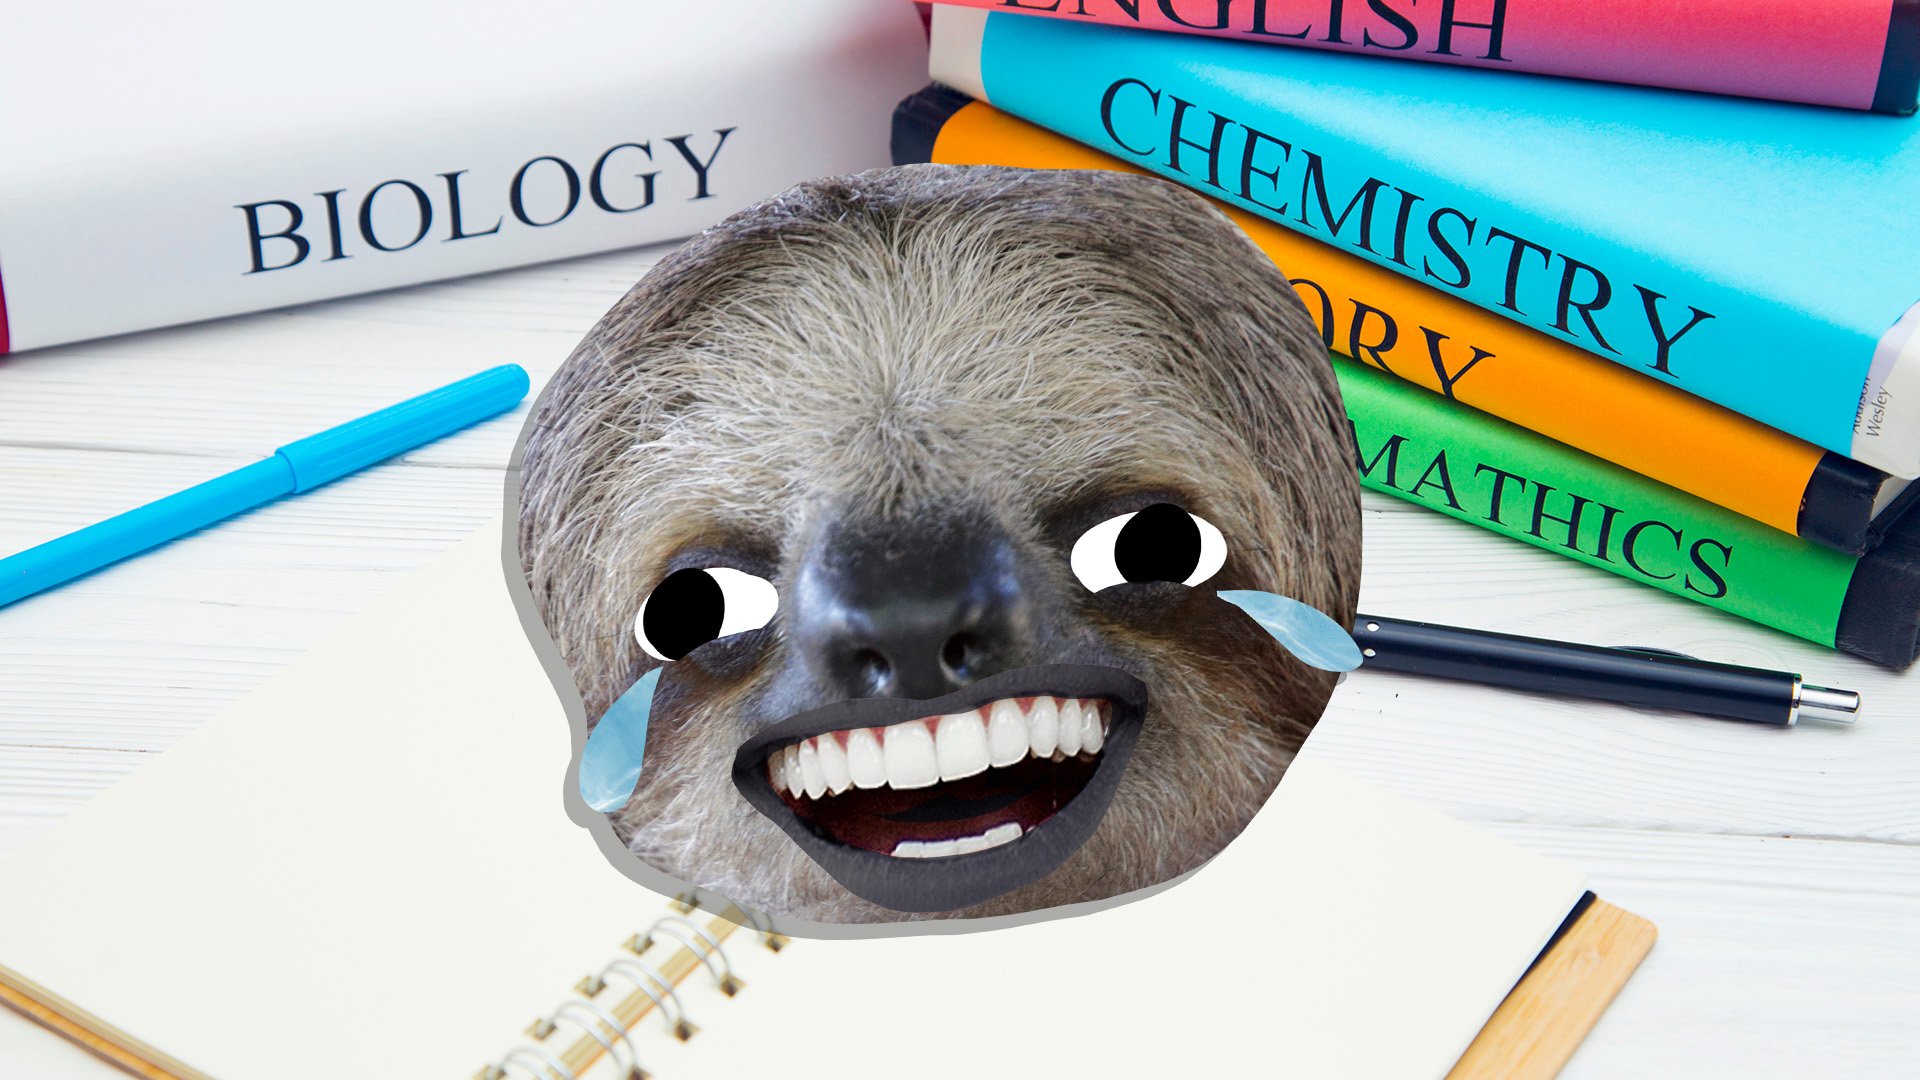 A sloth and some school books